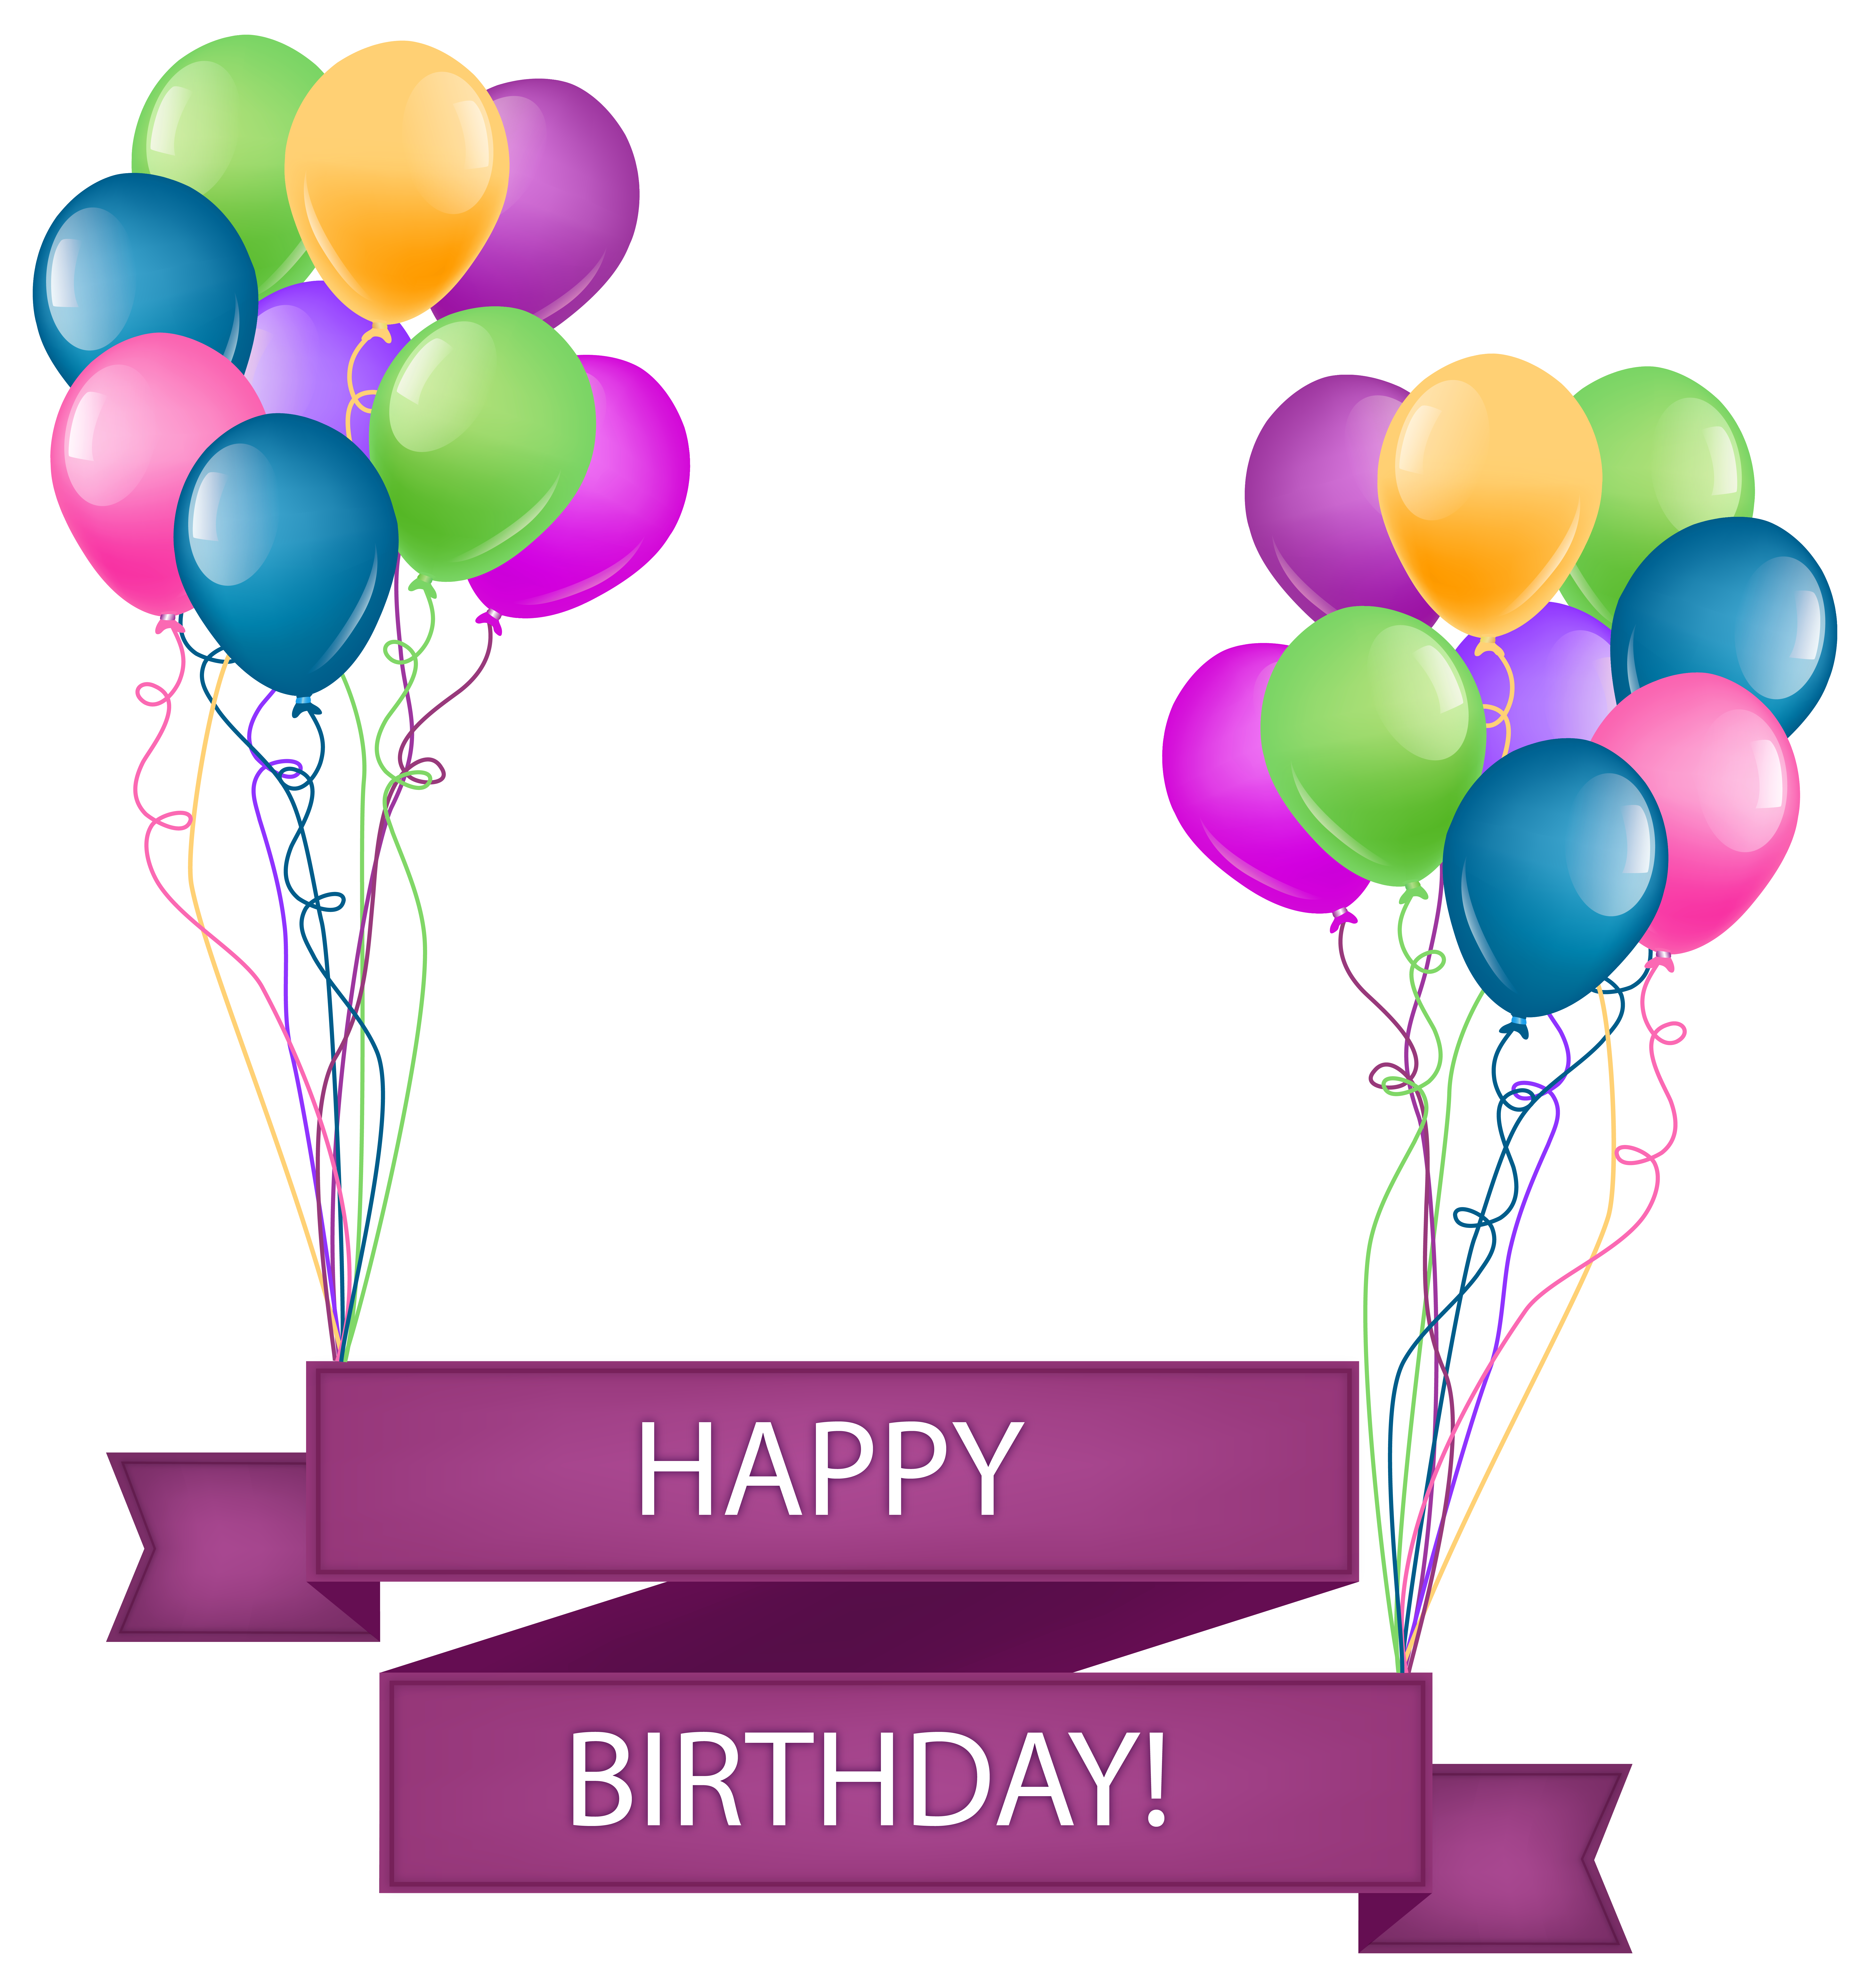 Happy banner with balloons. Gift clipart birthday stuff